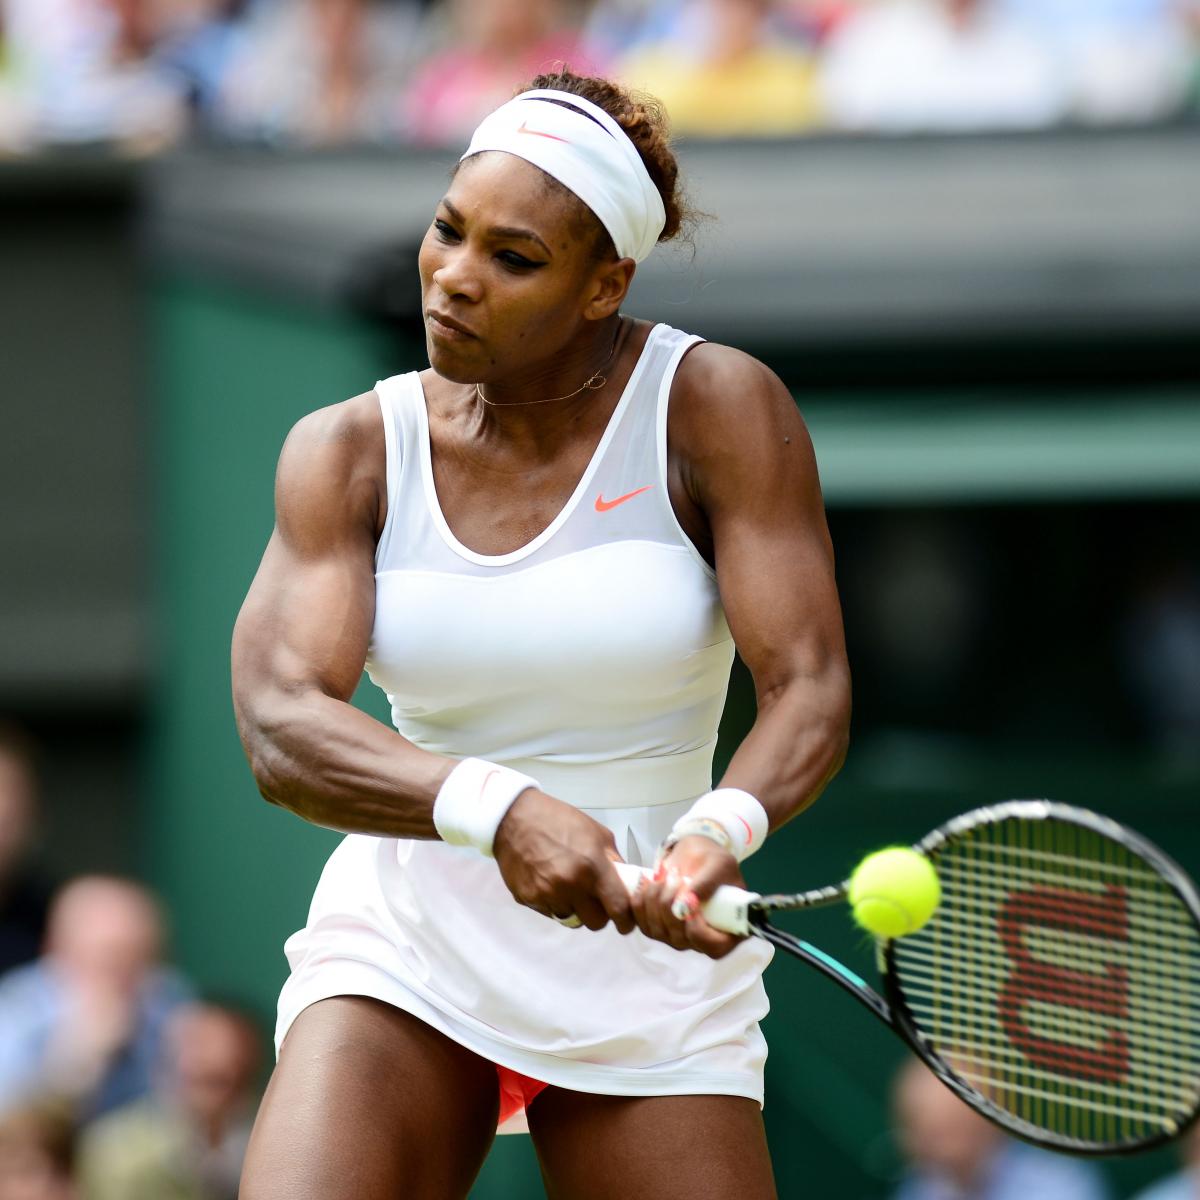 Serena Williams, Tennis Stars Discuss Body Image in New York Times Interview ...